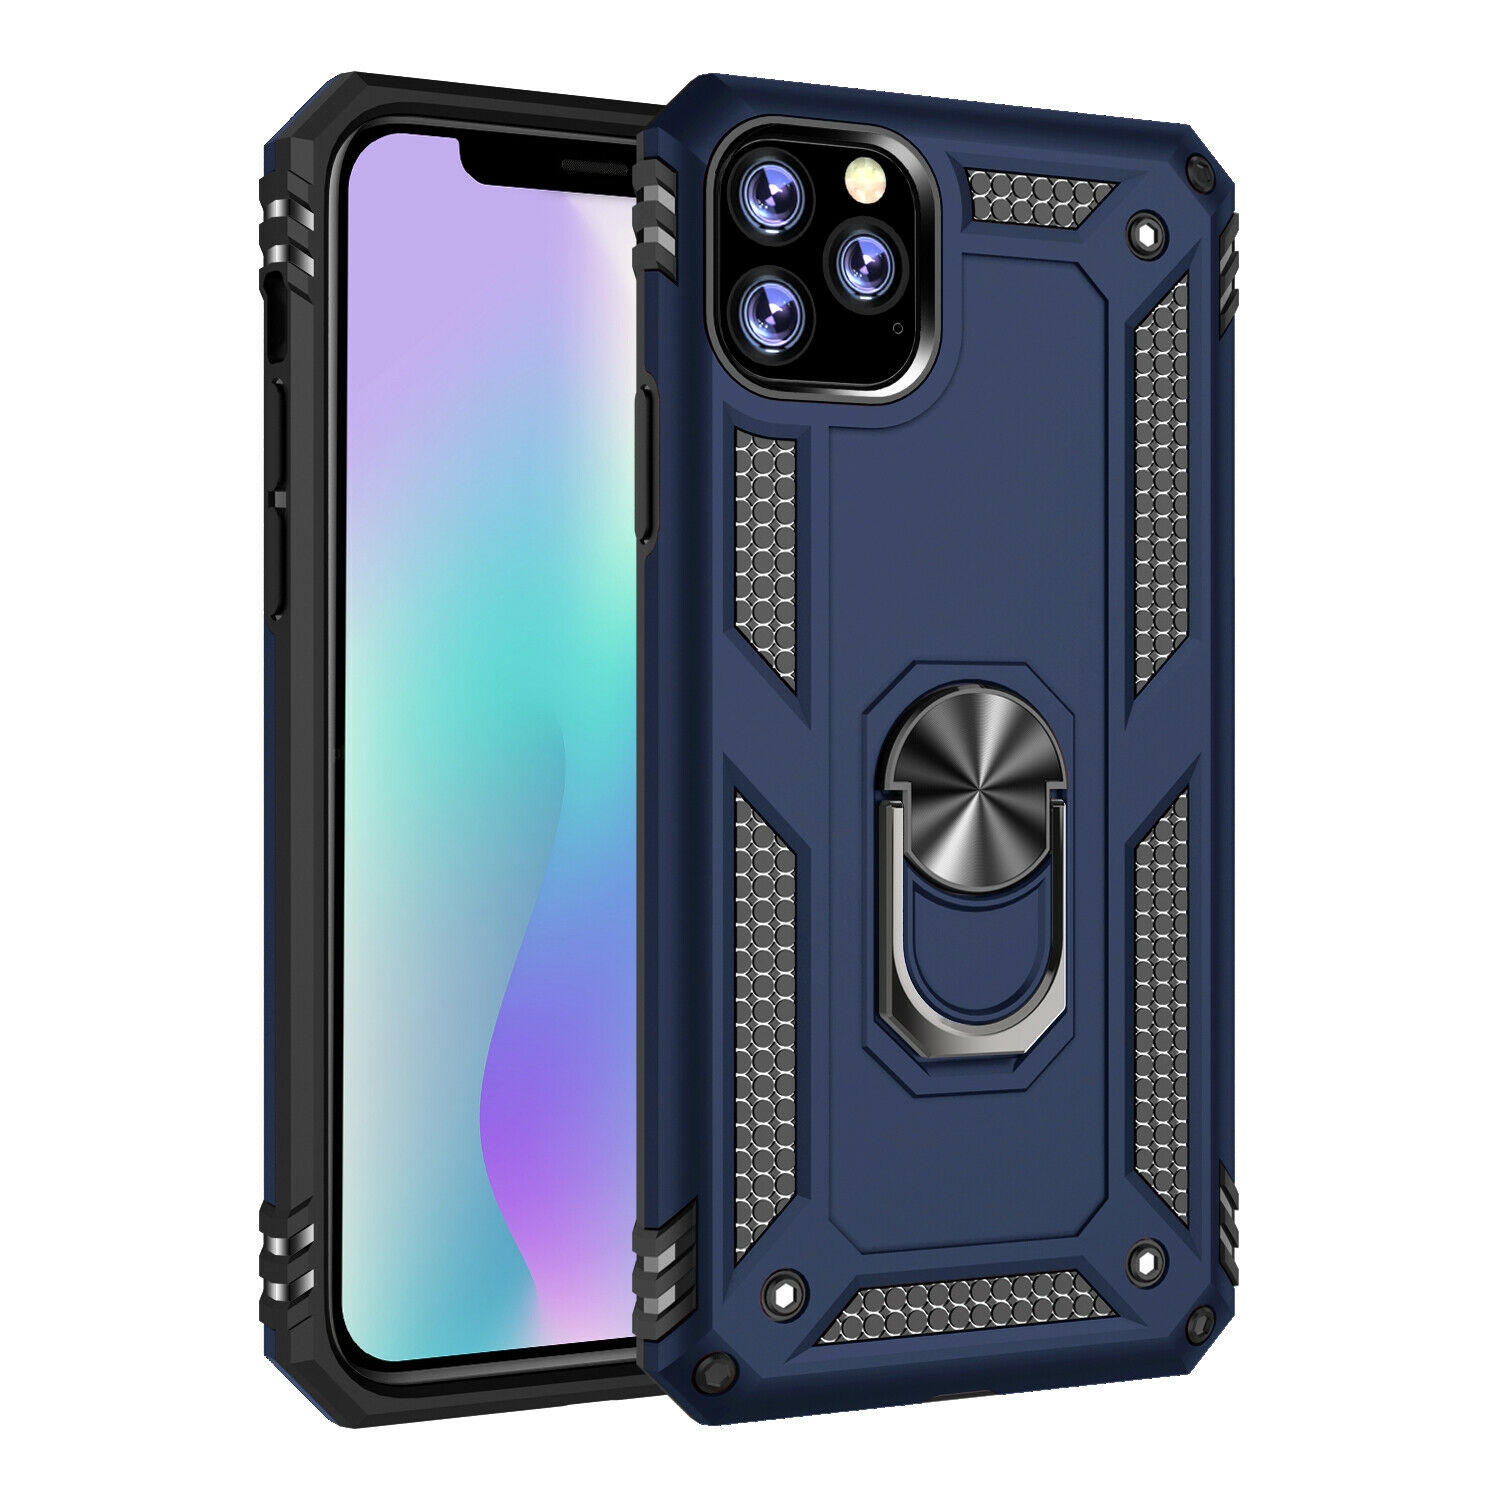 【CSmart】 Anti-Drop Hybrid Magnetic Hard Armor Case with Ring Holder for iPhone 12 Pro Max (6.7"), Navy